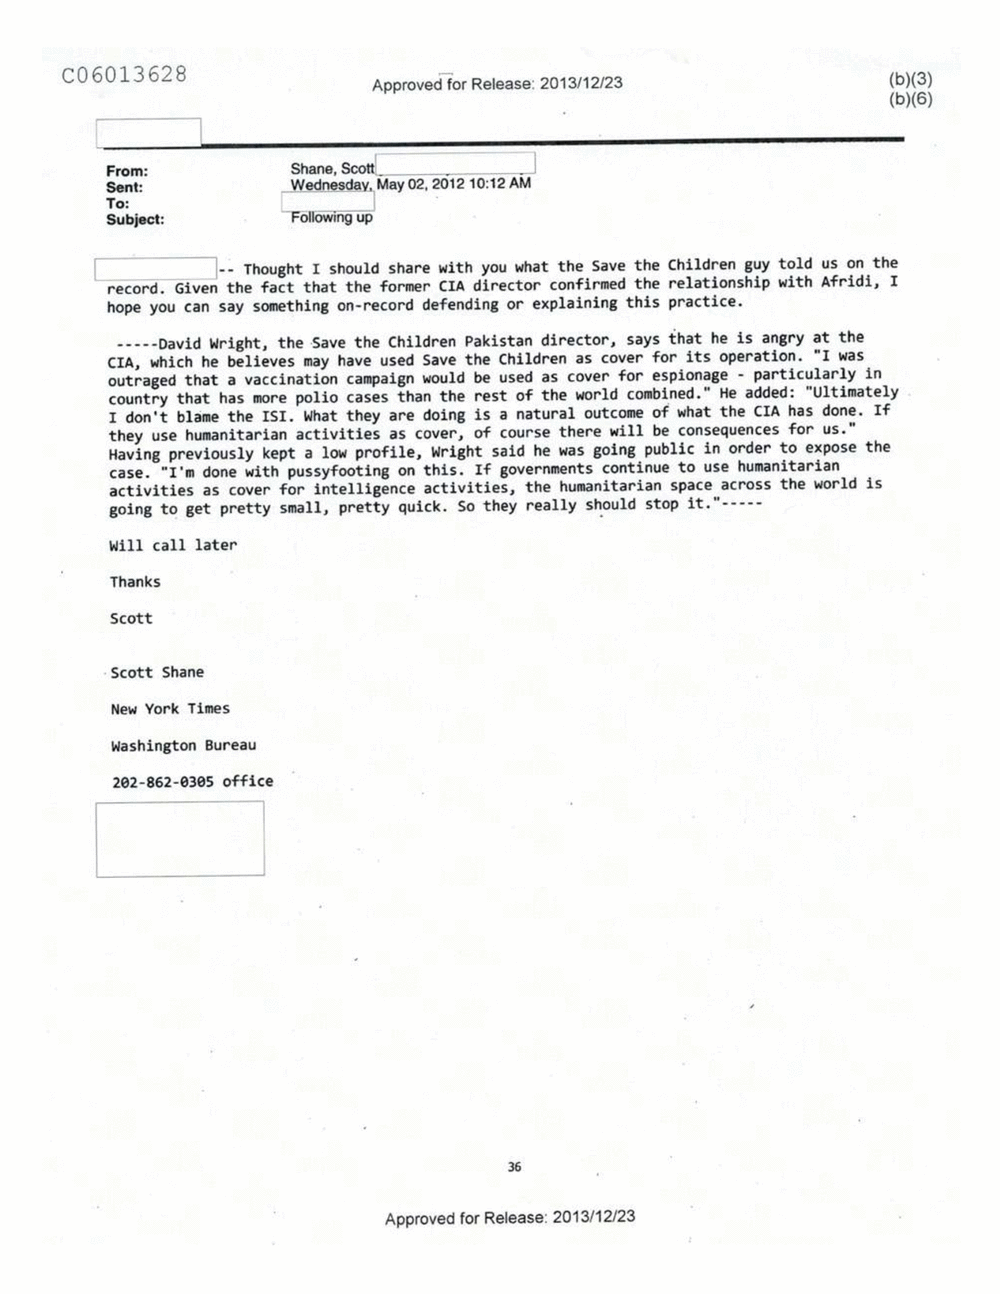 Page 465 from Email Correspondence Between Reporters and CIA Flacks